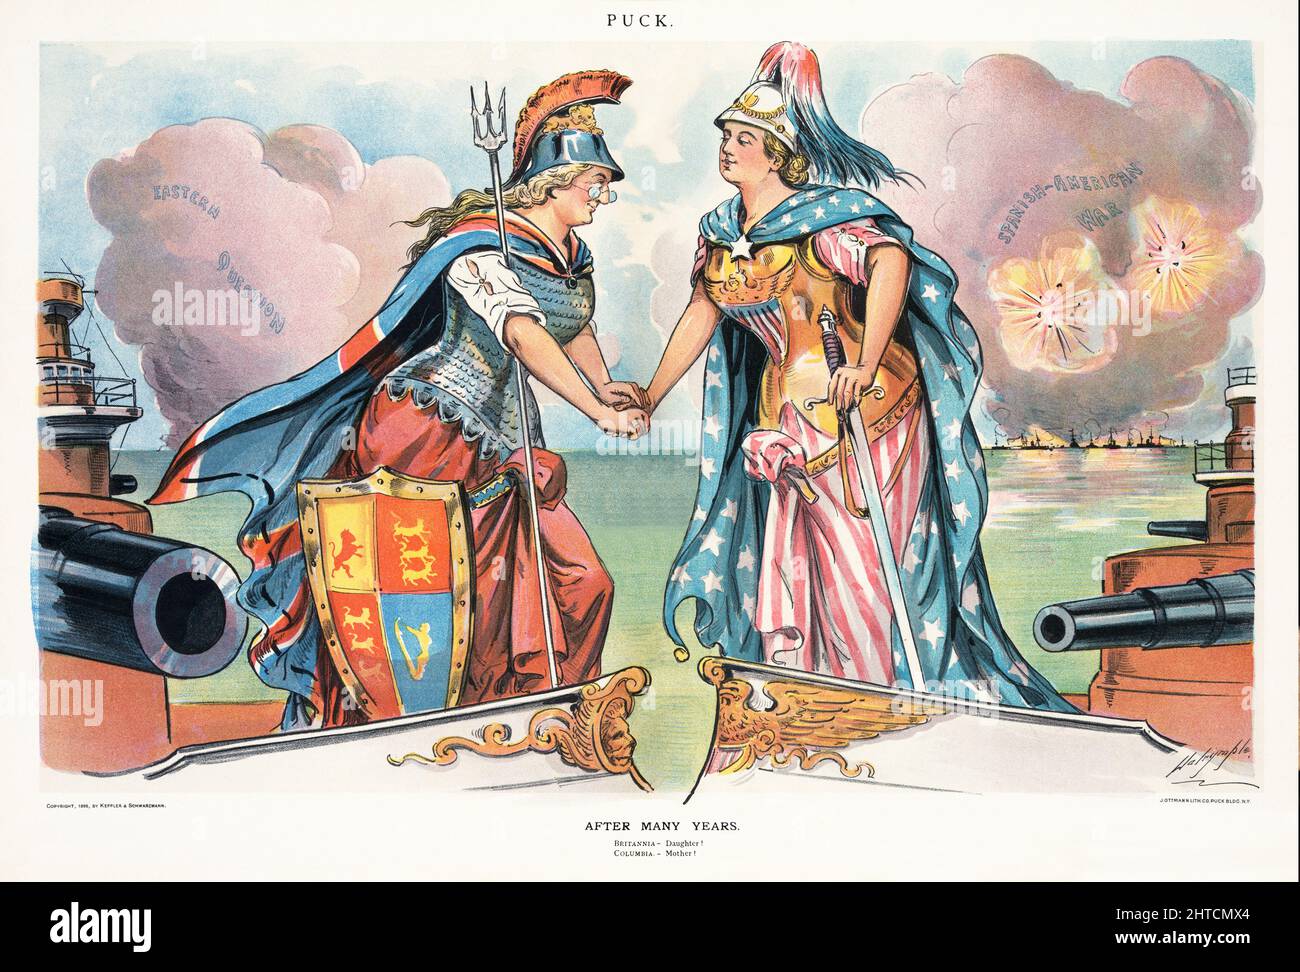 A late 19th century American Puck Magazine illustration of Britannia and Columbia shaking hands from the bows of British and American battleships; dark clouds behind Britannia are labelled 'Eastern Question' and behind Columbia are the dark clouds of war labeled 'Spanish-American War'. Another evocation of the Special Relationship between the USA and Great Britain. Stock Photo